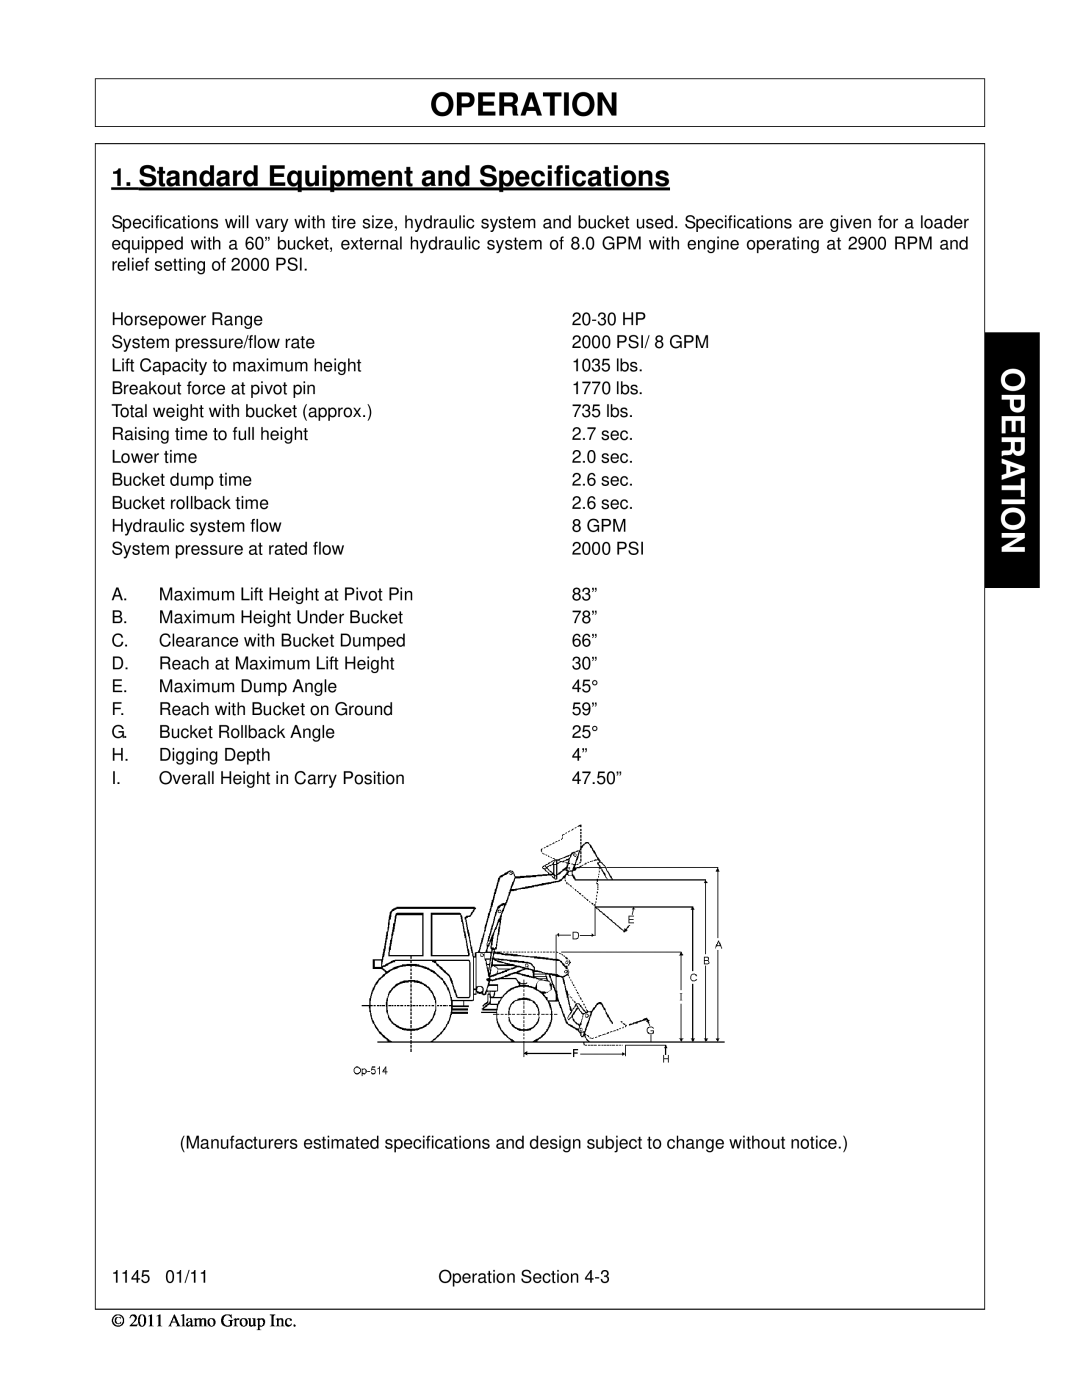 Bush Hog 1145 manual Operation, Standard Equipment and Specifications 